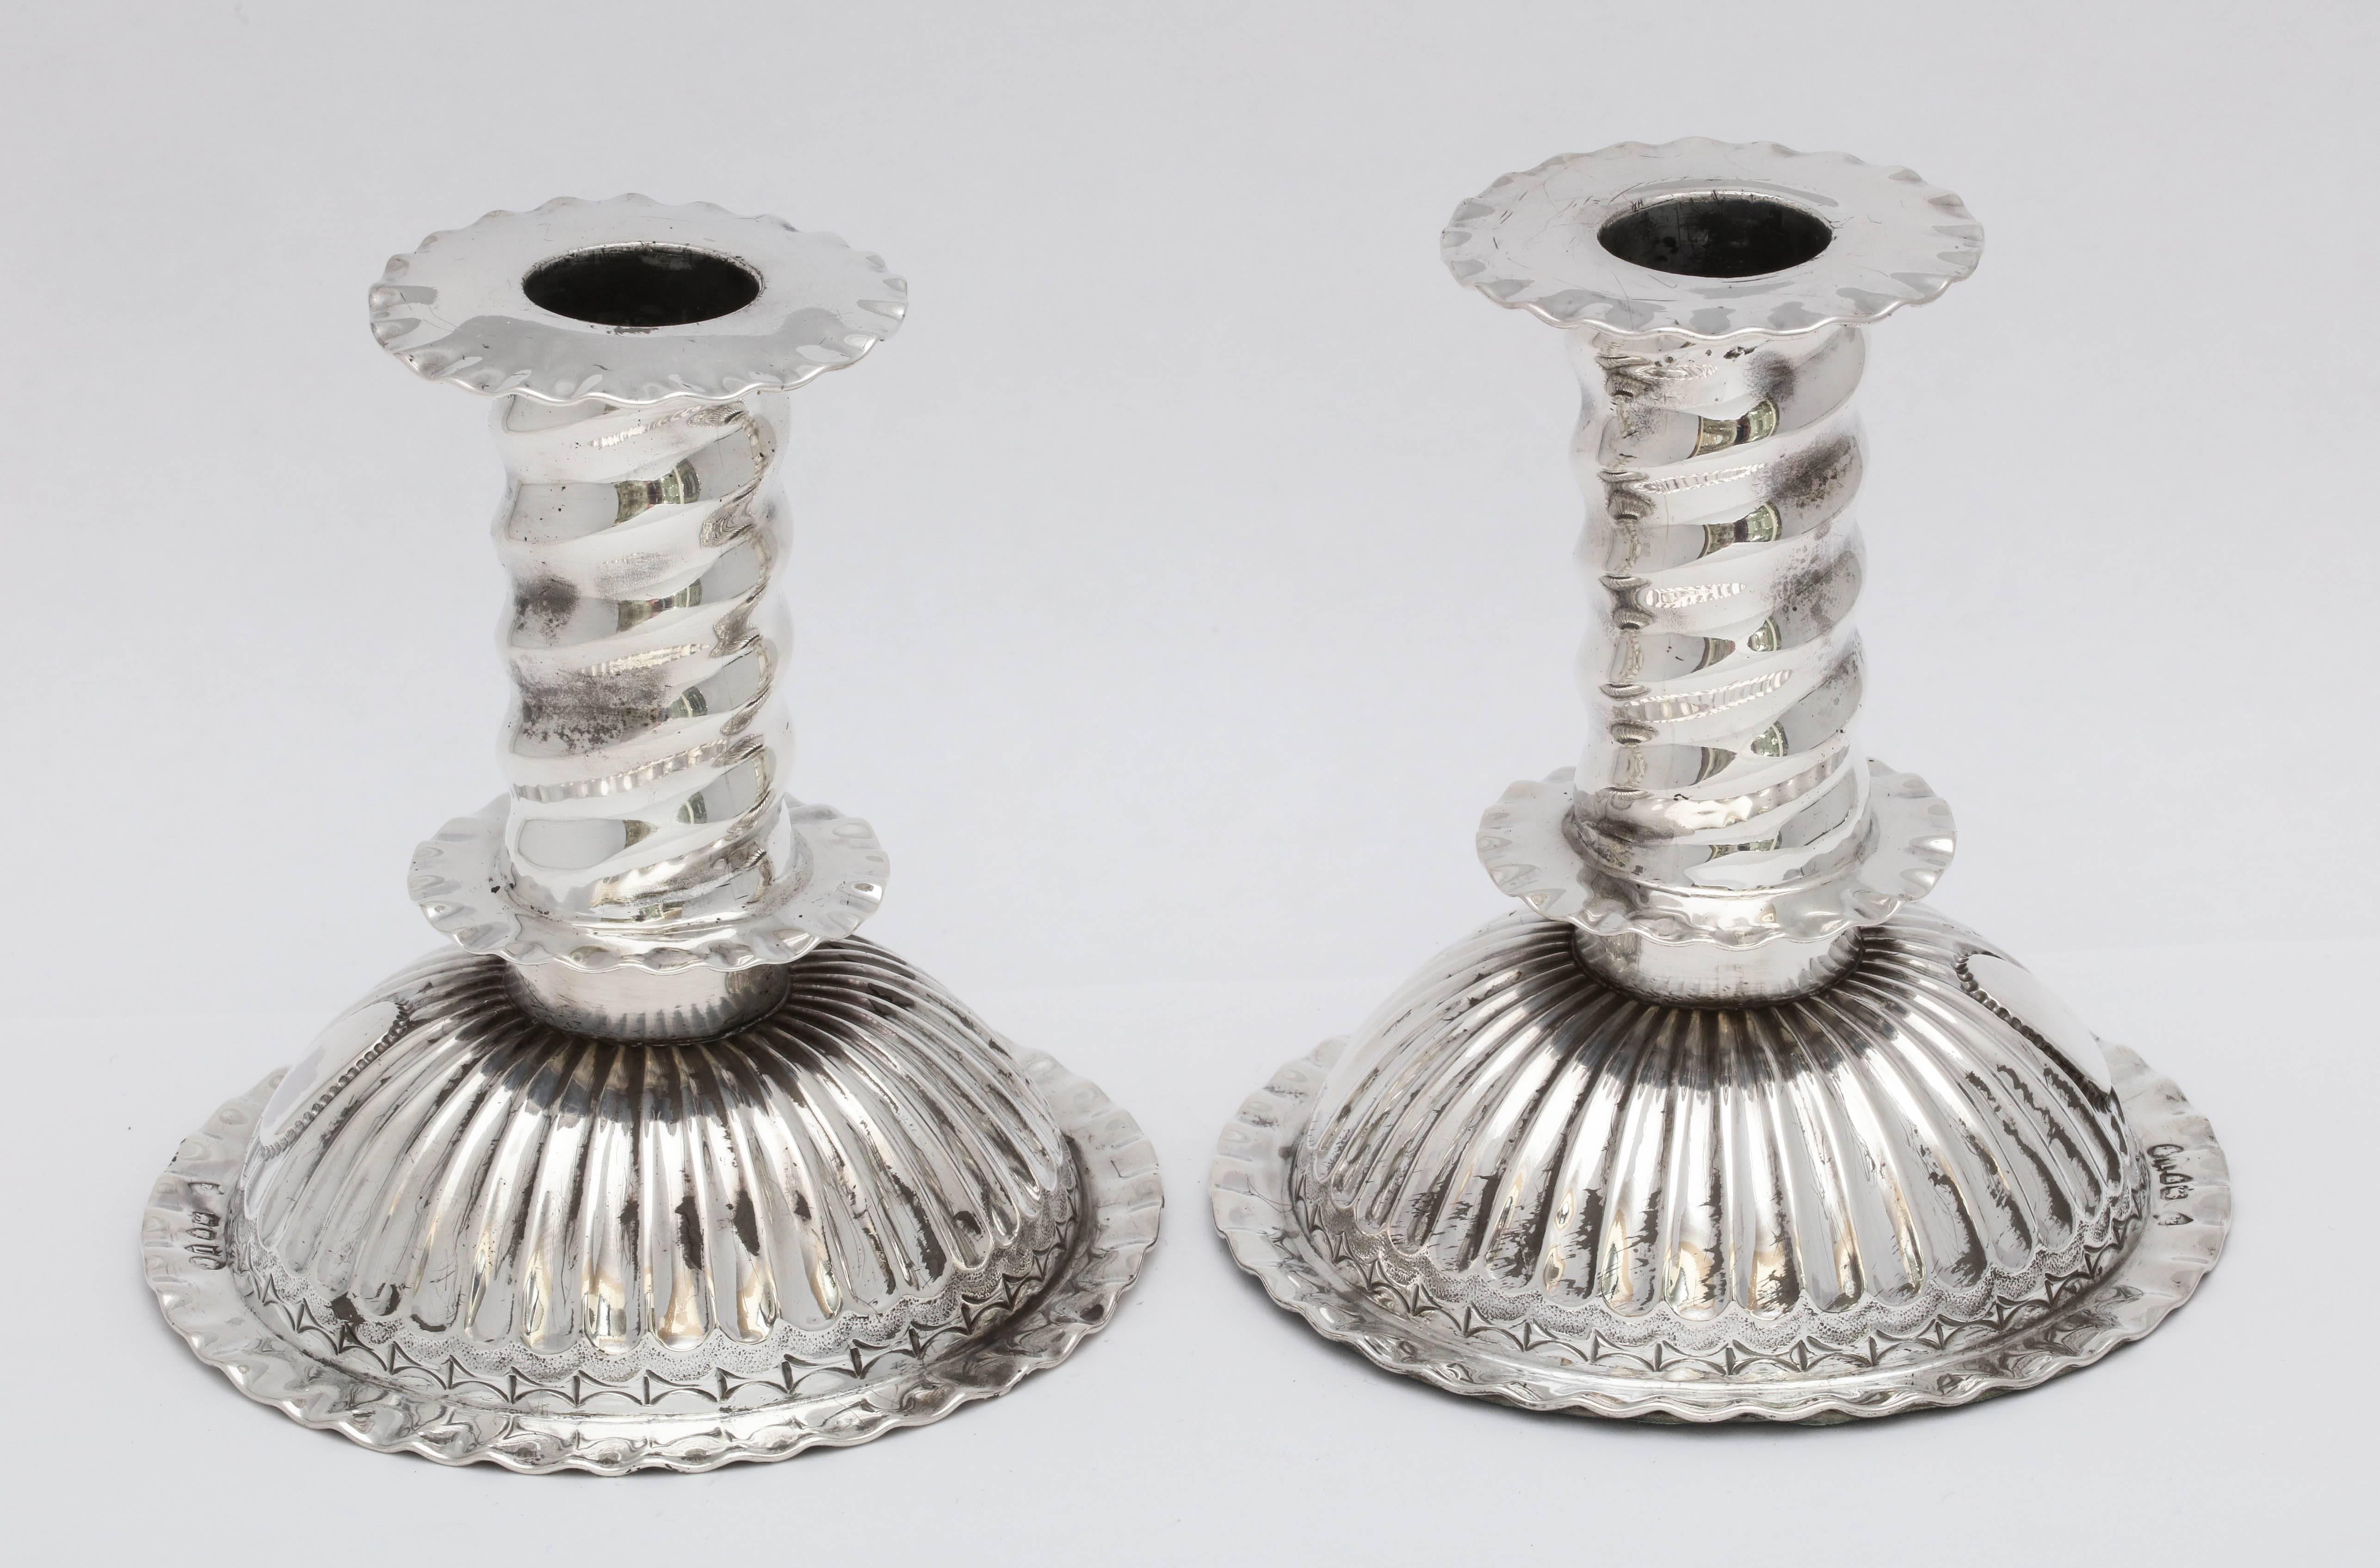 Rare, sterling silver, Victorian pair of Capstan candlesticks in the 16th century European style, London, 1886, Robert Pringle - maker. Removable bobeches. Each measures 4 1/4 inches high x 4 inches diameter across base. Weighted. Vacant cartouche.